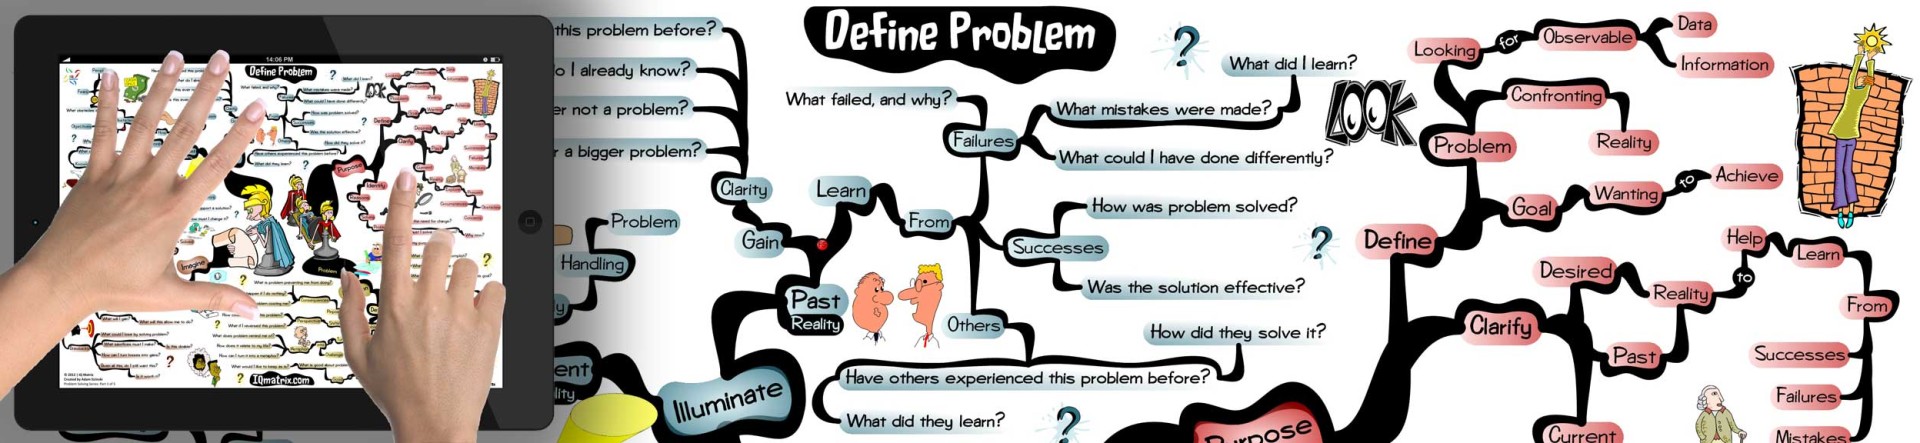 Tools for defining the problem   creatingminds